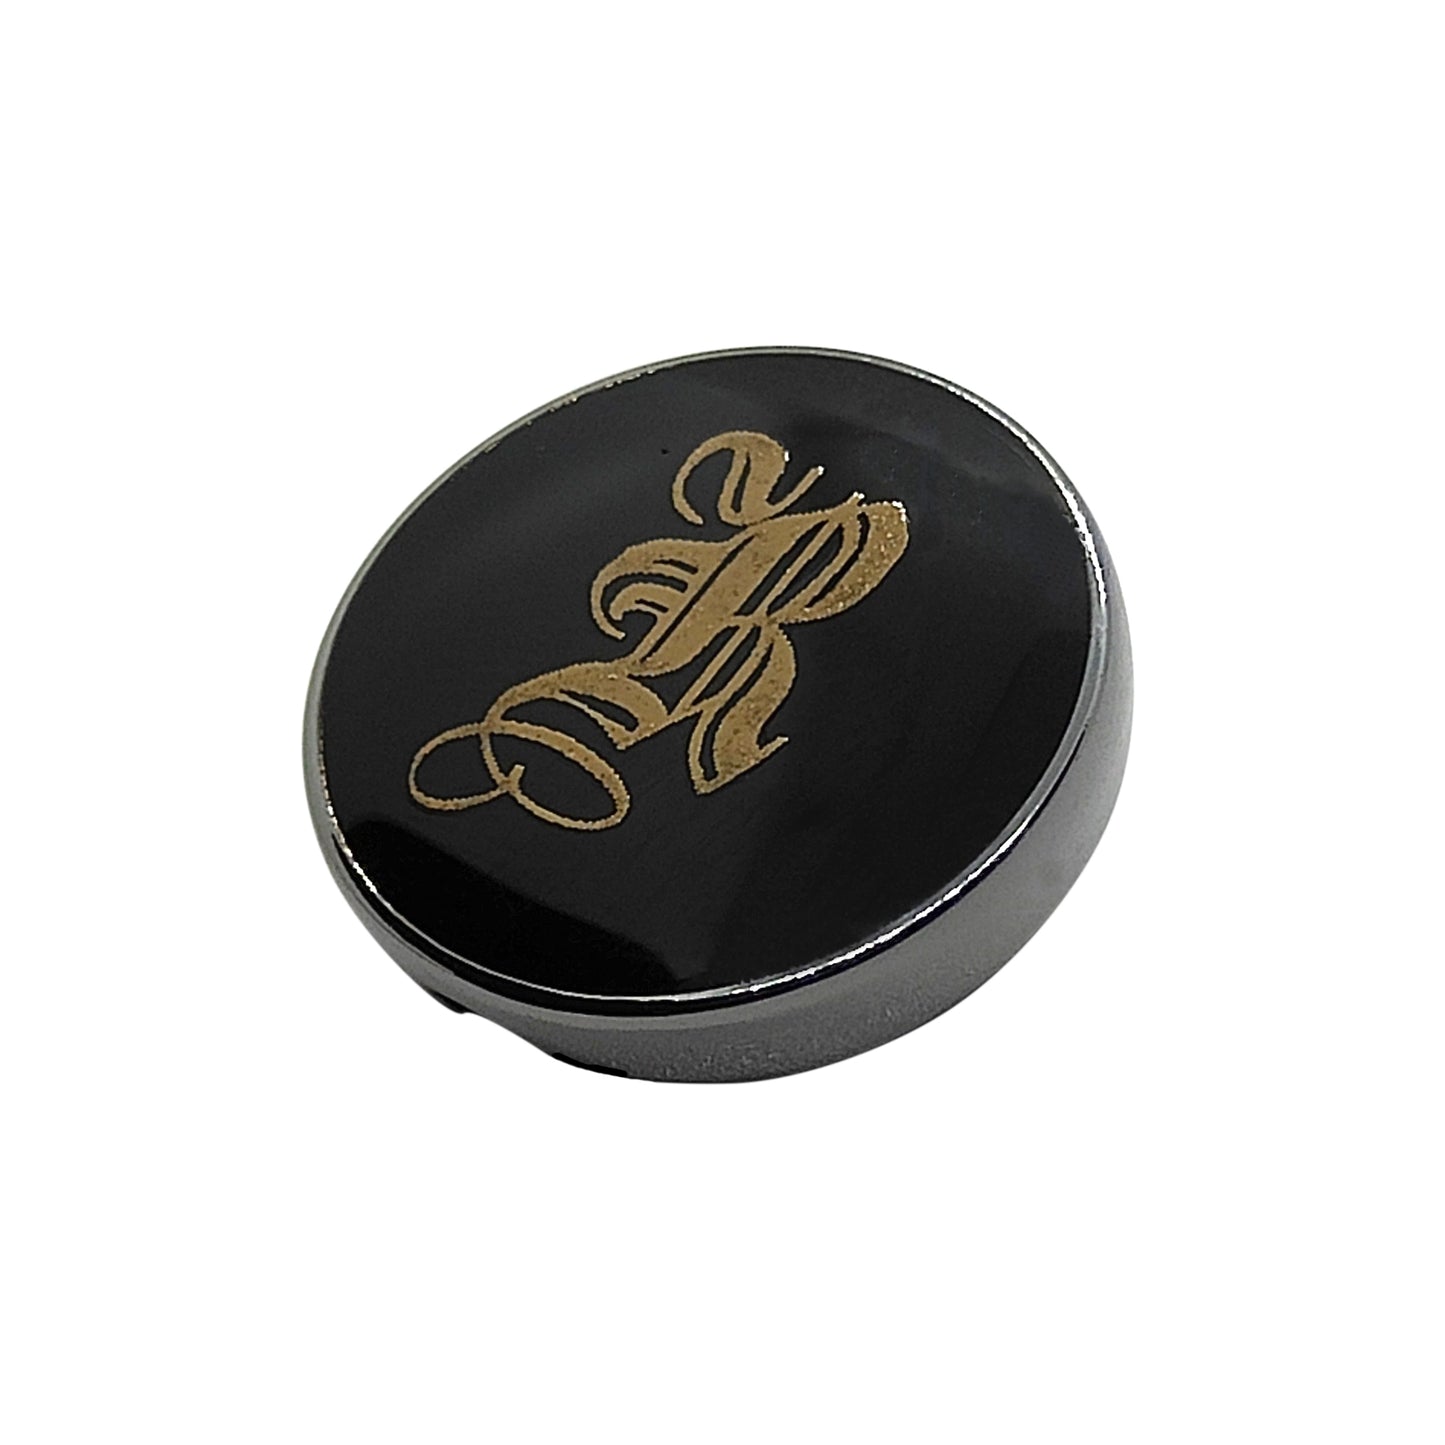 21mm button in carbon metal and black enamel, customizable